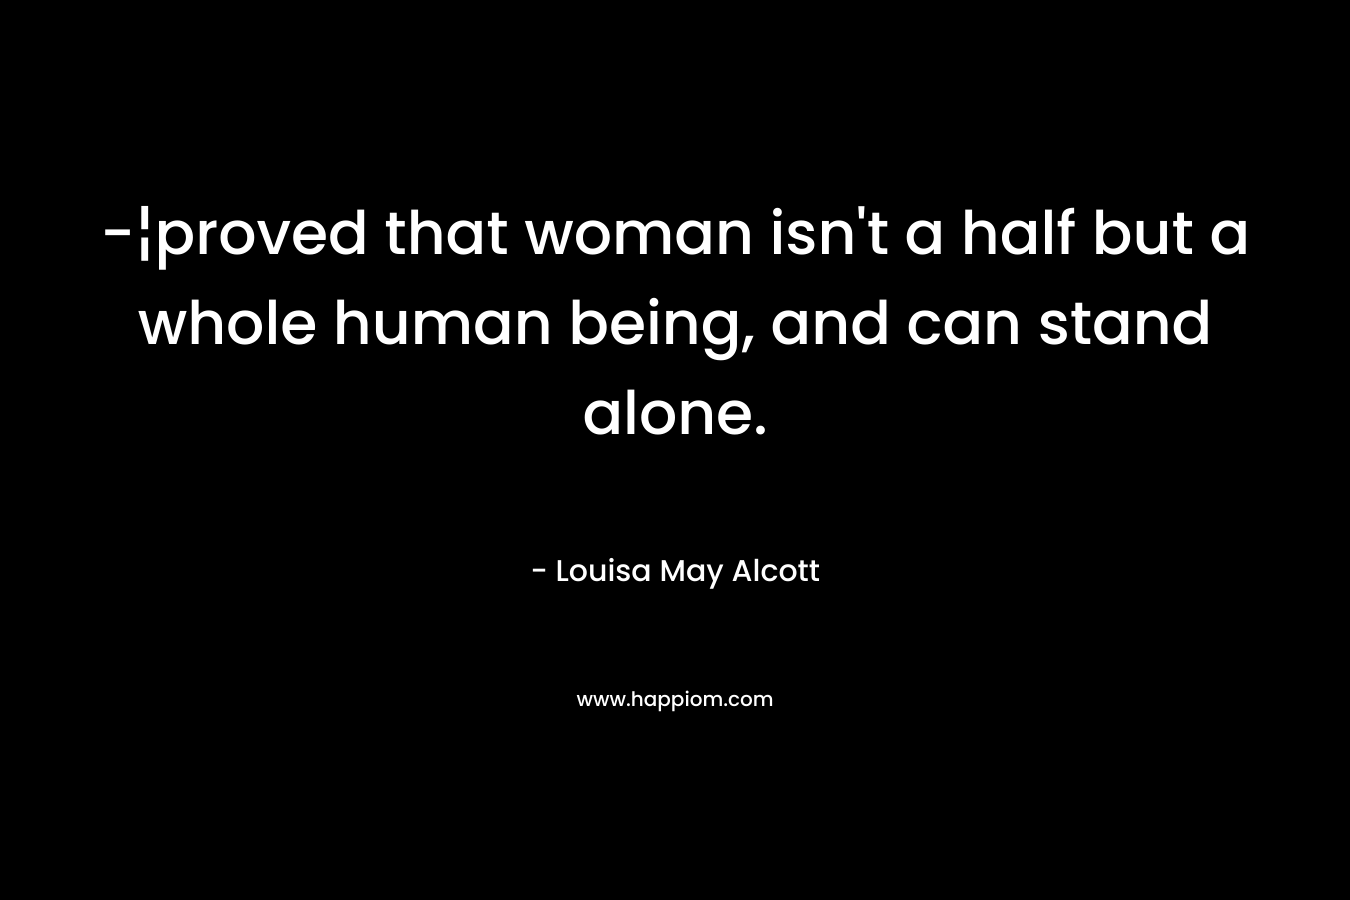 -¦proved that woman isn't a half but a whole human being, and can stand alone.